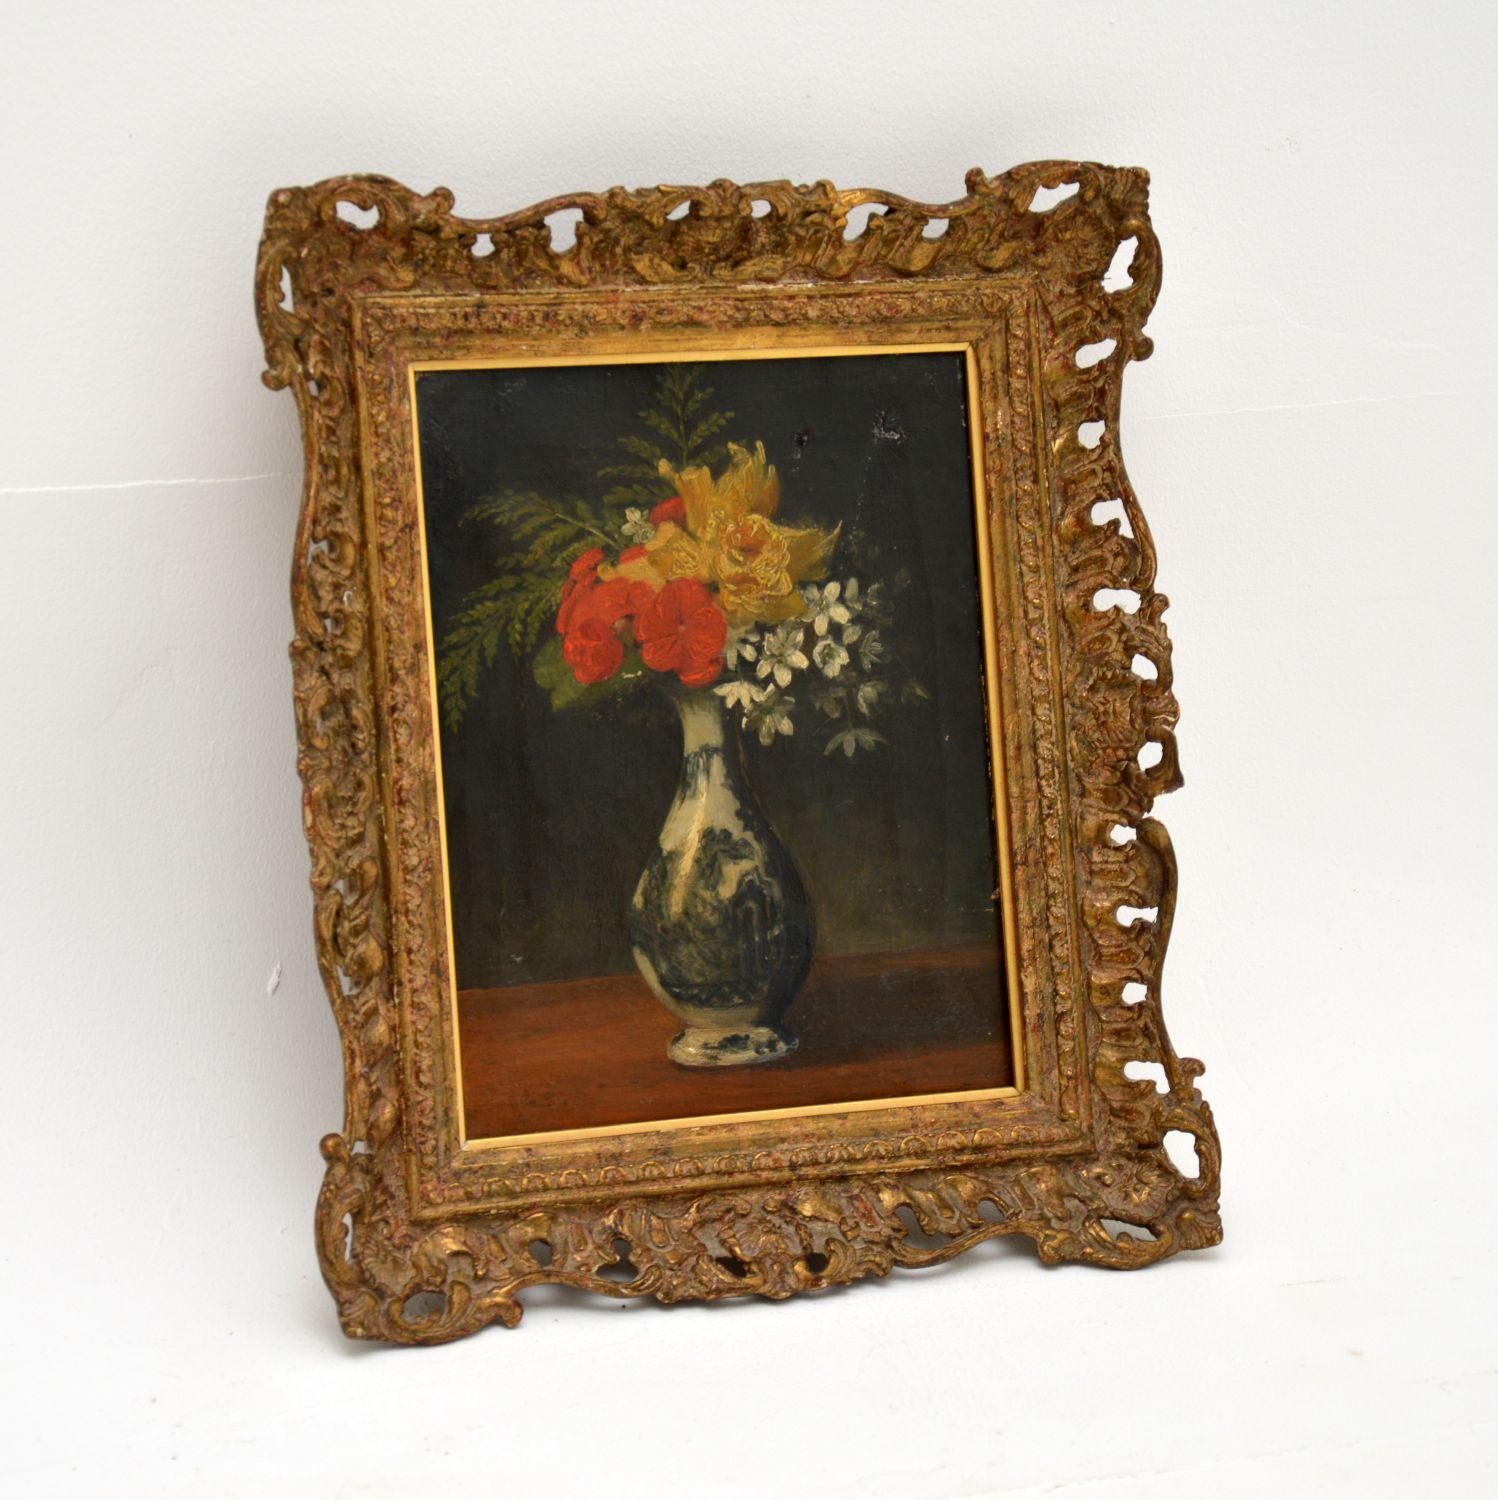 A small antique still life oil painting, in a gorgeous gilt wood frame. We believe this dates from the 19th century, possibly earlier.

It is beautifully executed and is a lovely subject. The frame is also of excellent quality and has a charming